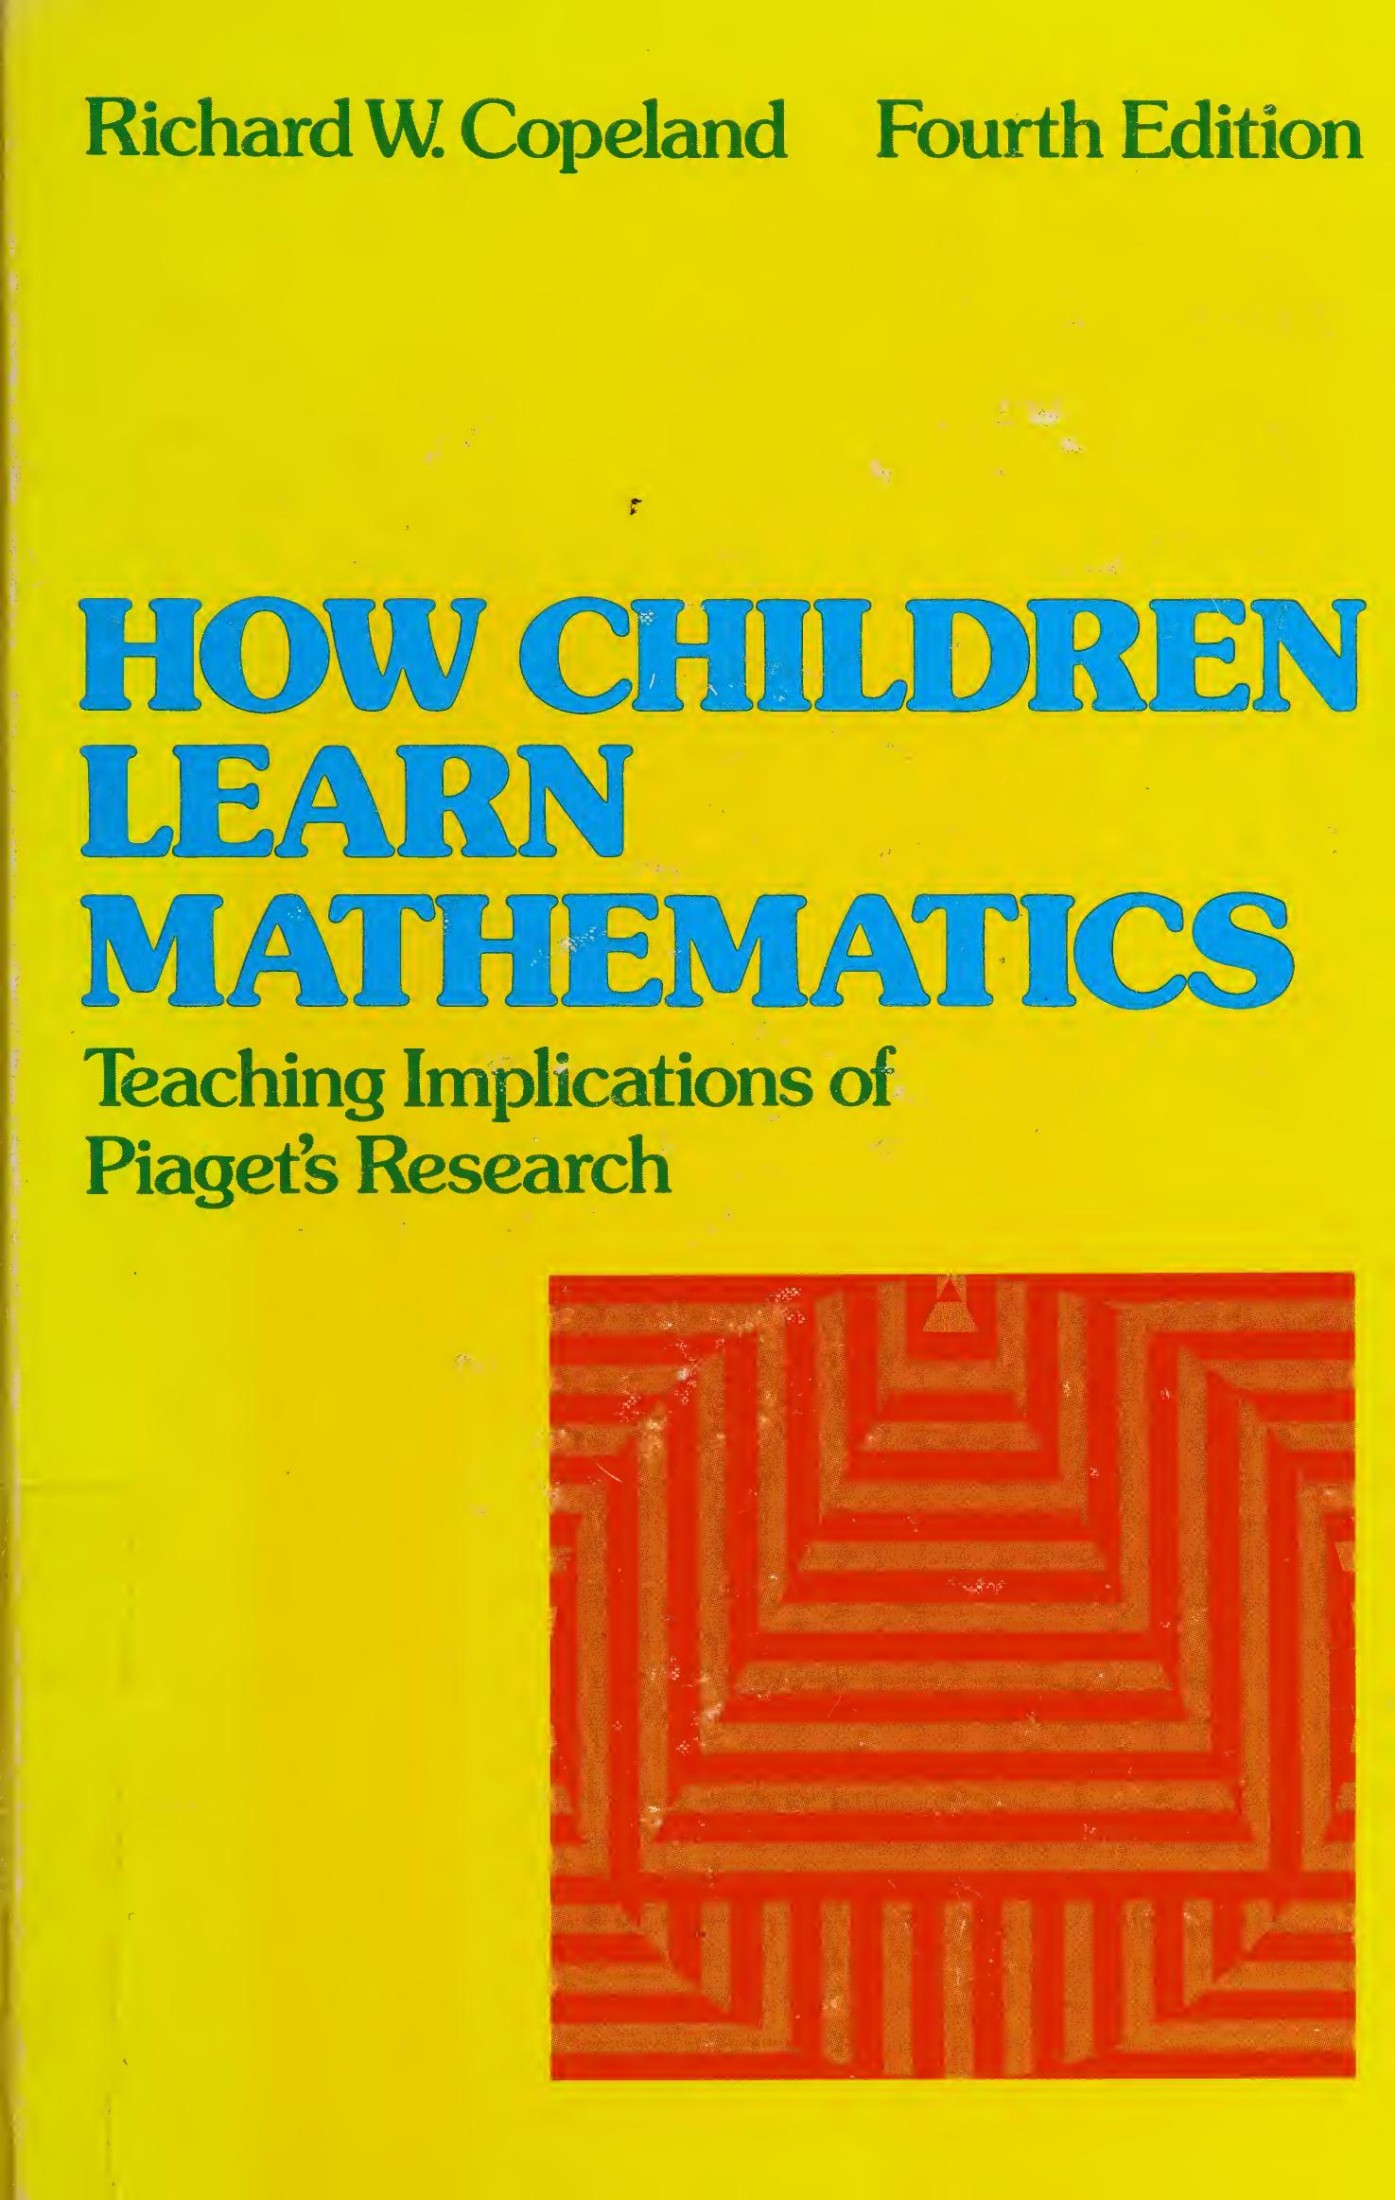 How Children Learn Mathematics: Teaching Implications of Piaget's Research